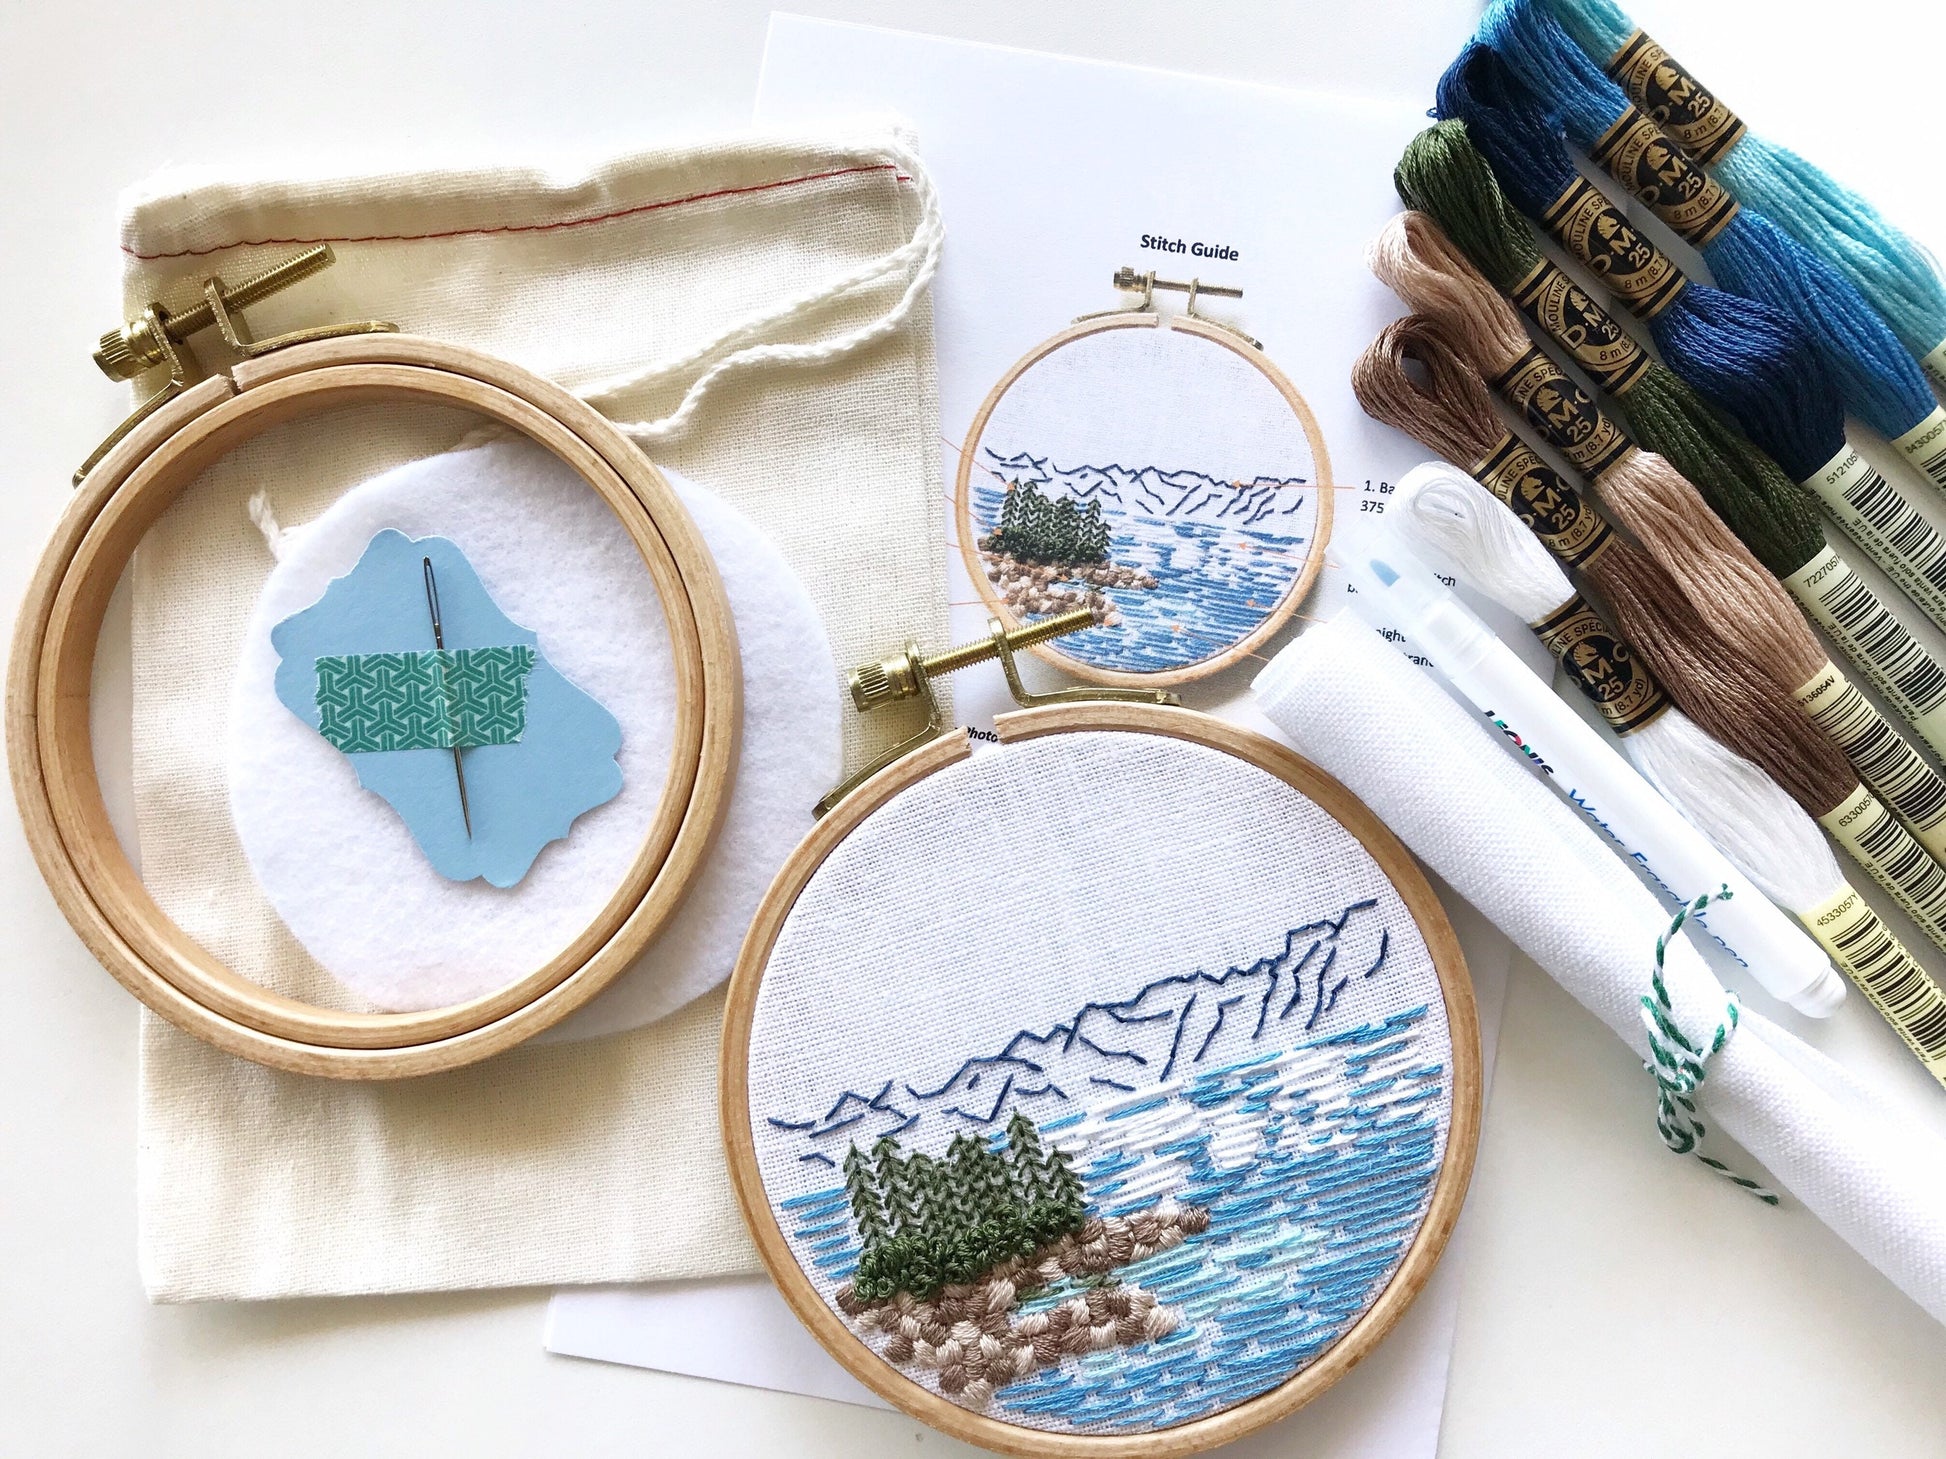 Hand Embroidery: Stitches at a Glance – Lakes Makerie